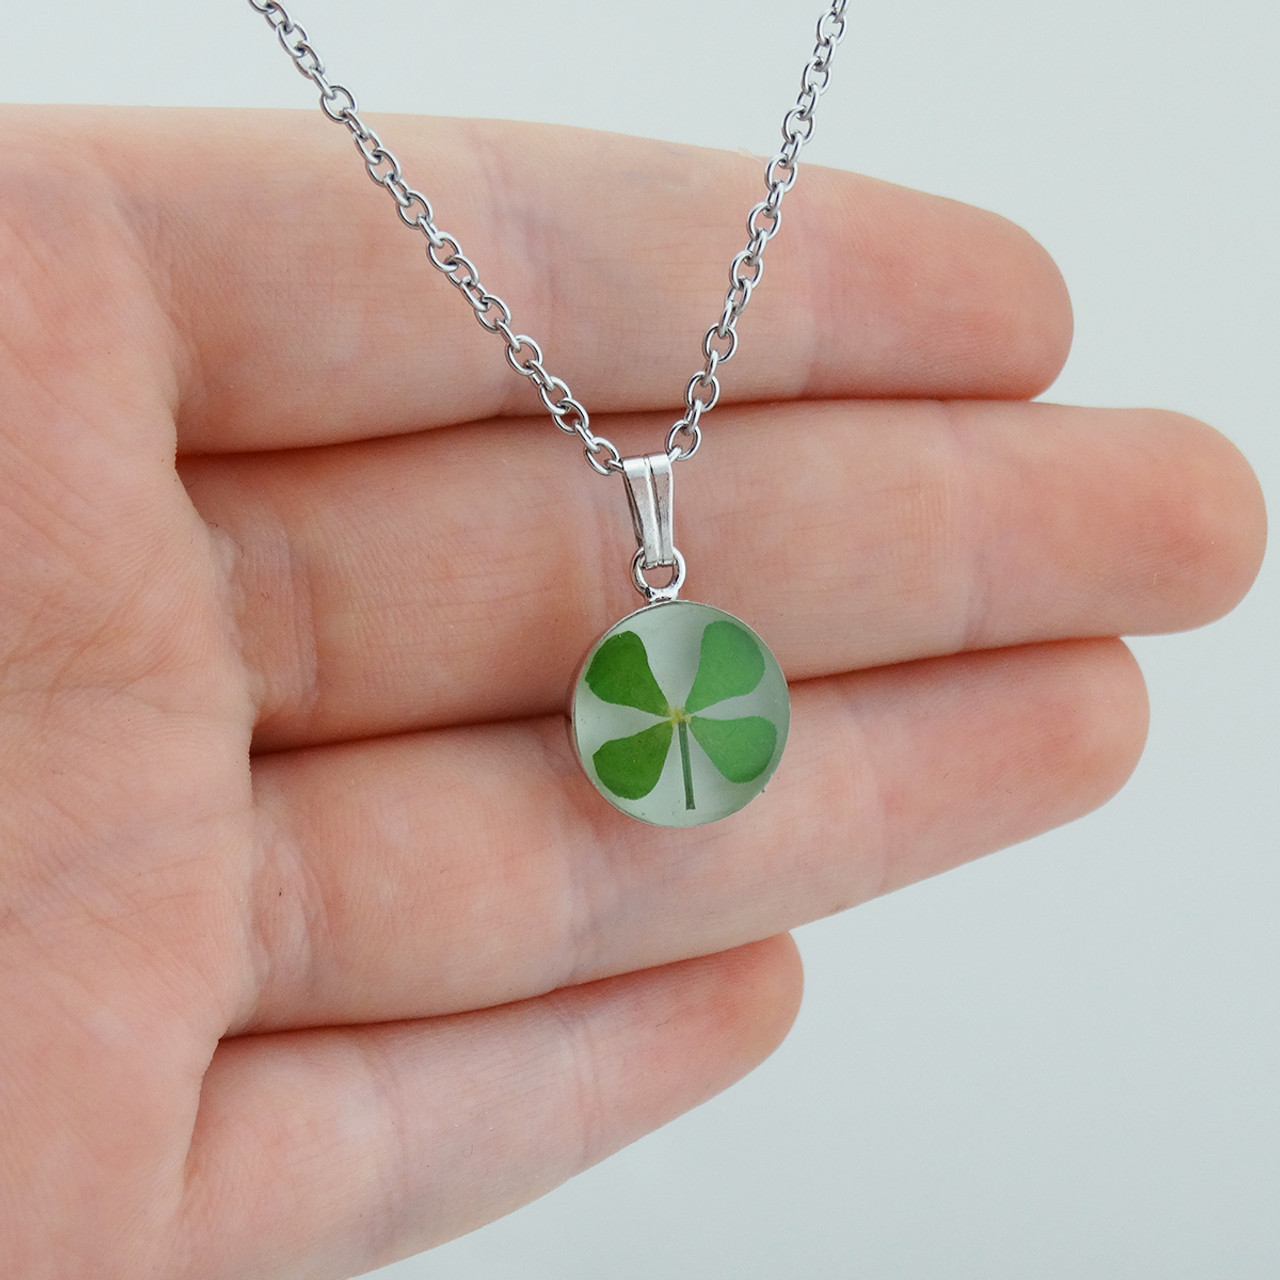 Stainless Steel Four Leaf Clover Pendant Necklace - FashionJunkie4Life